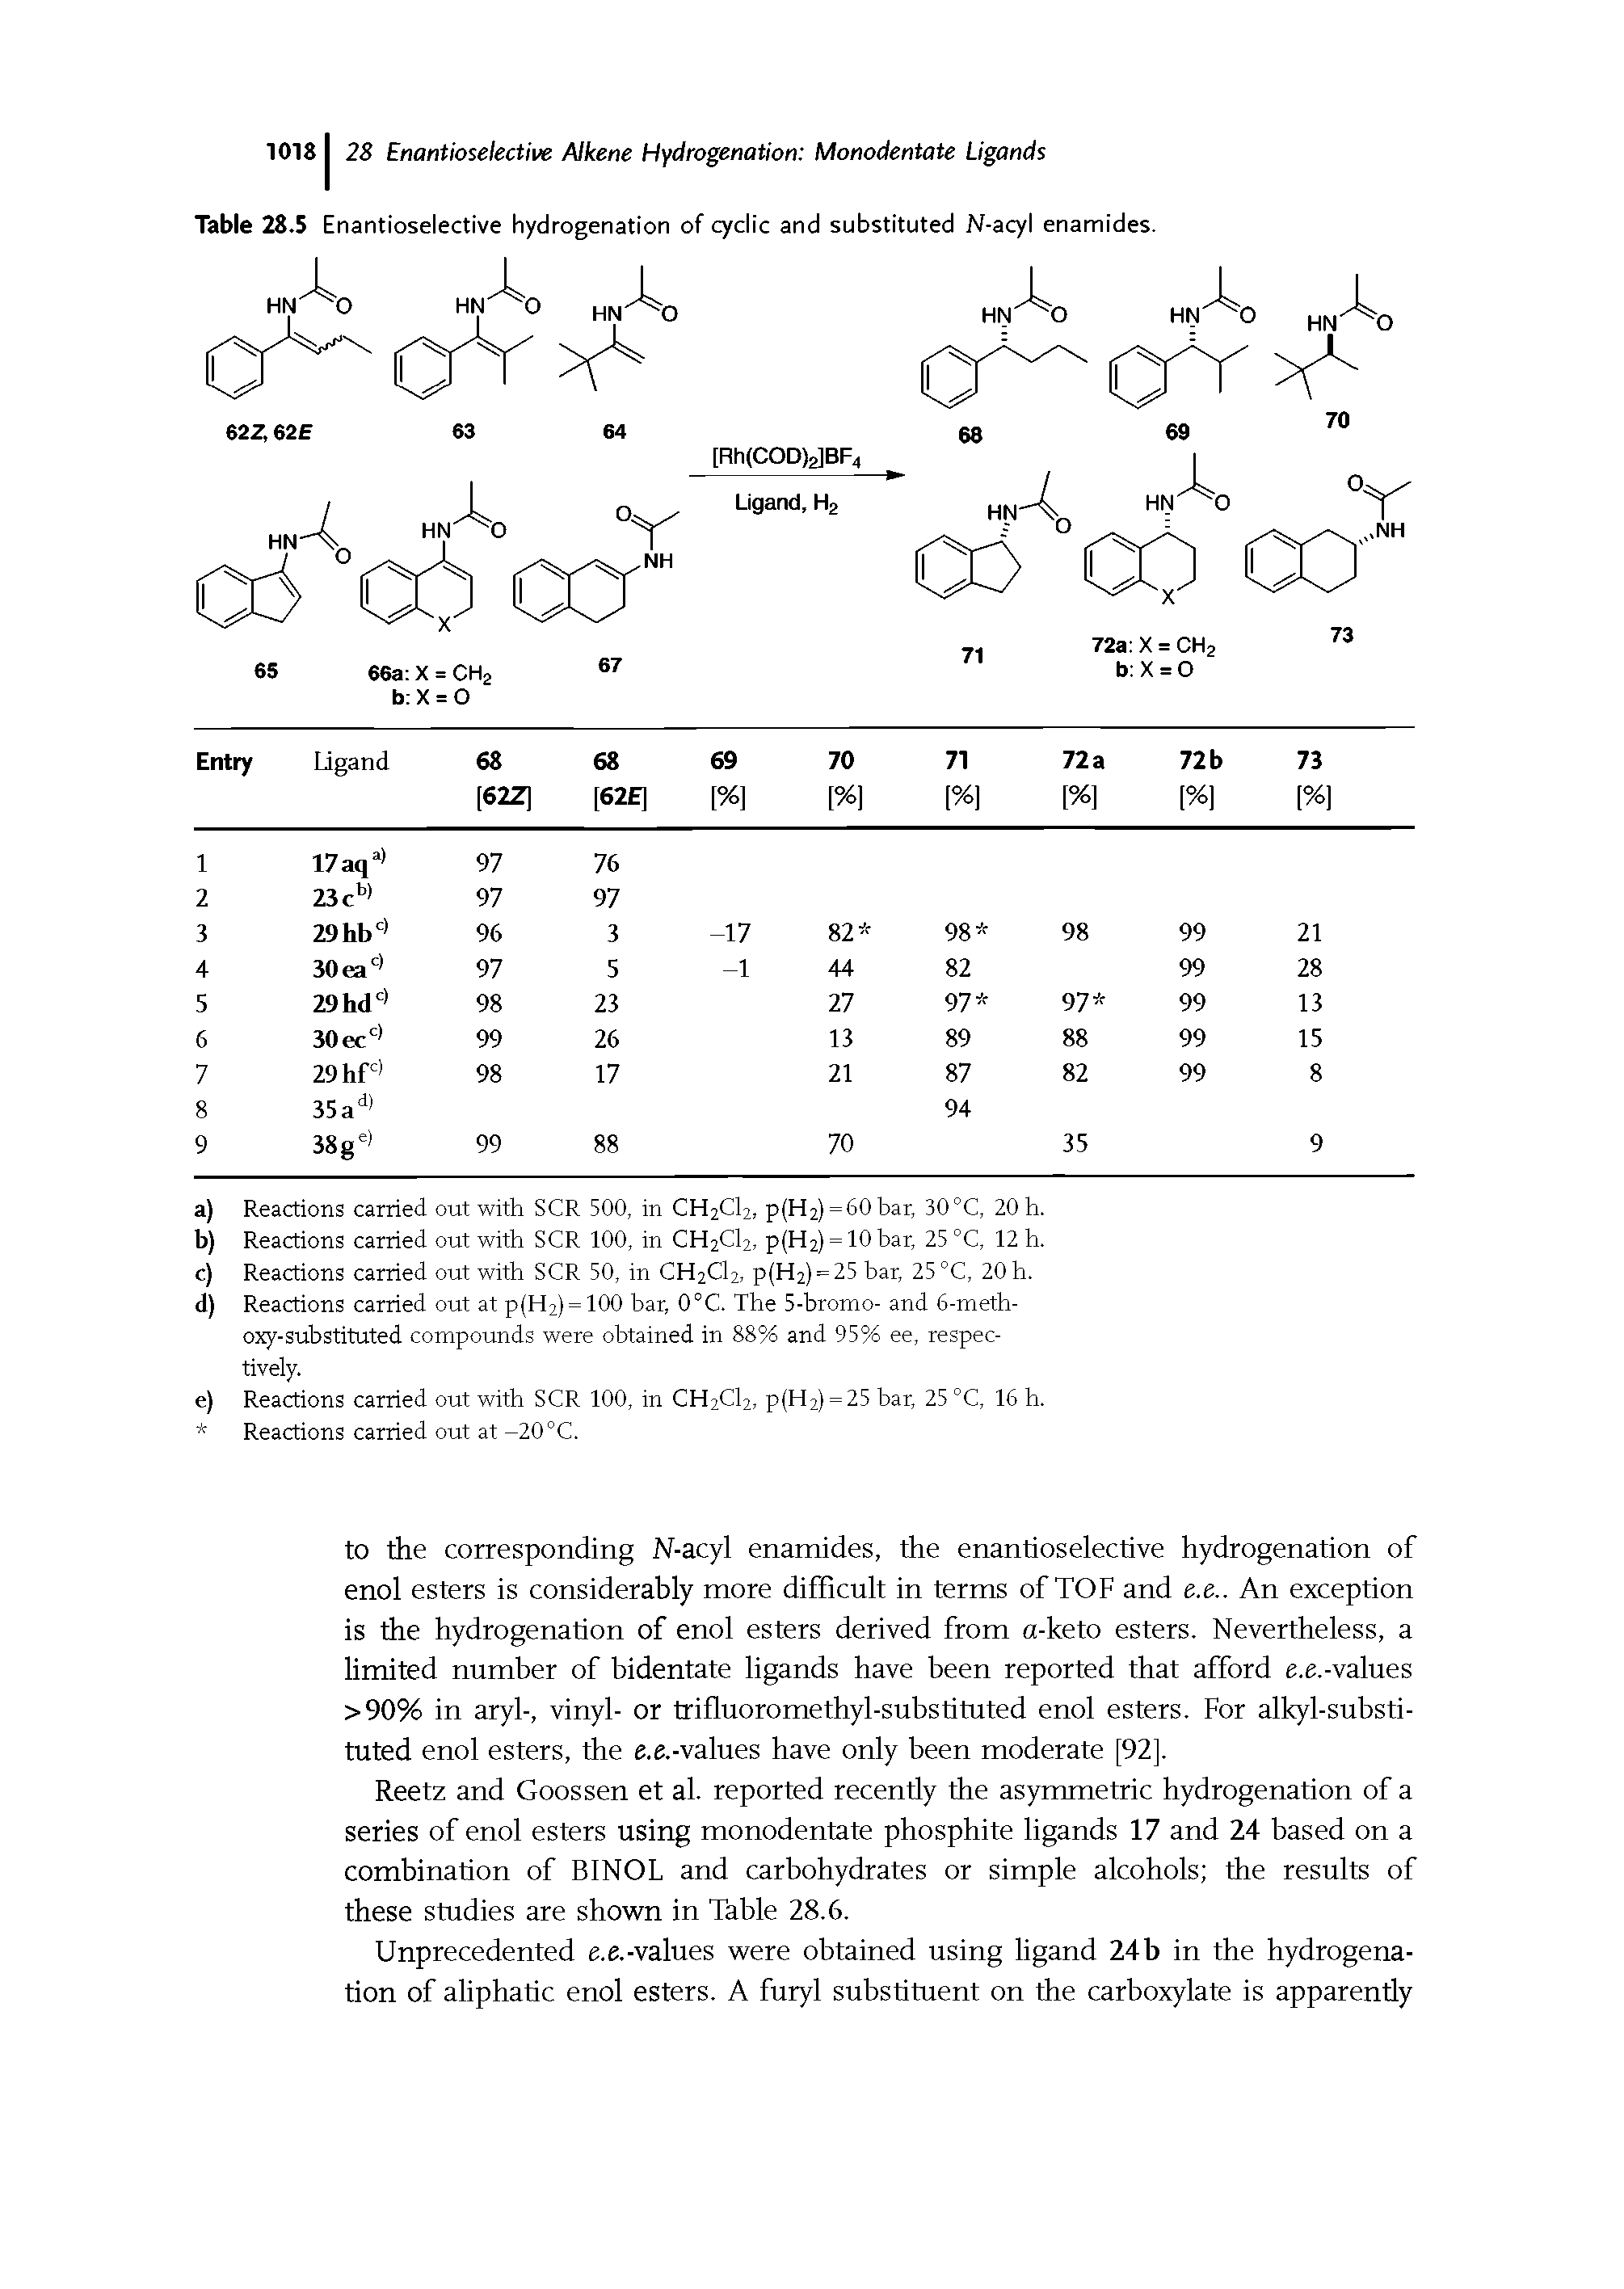 Table 28.5 Enantioselective hydrogenation of cyclic and substituted N-acyl enamides.